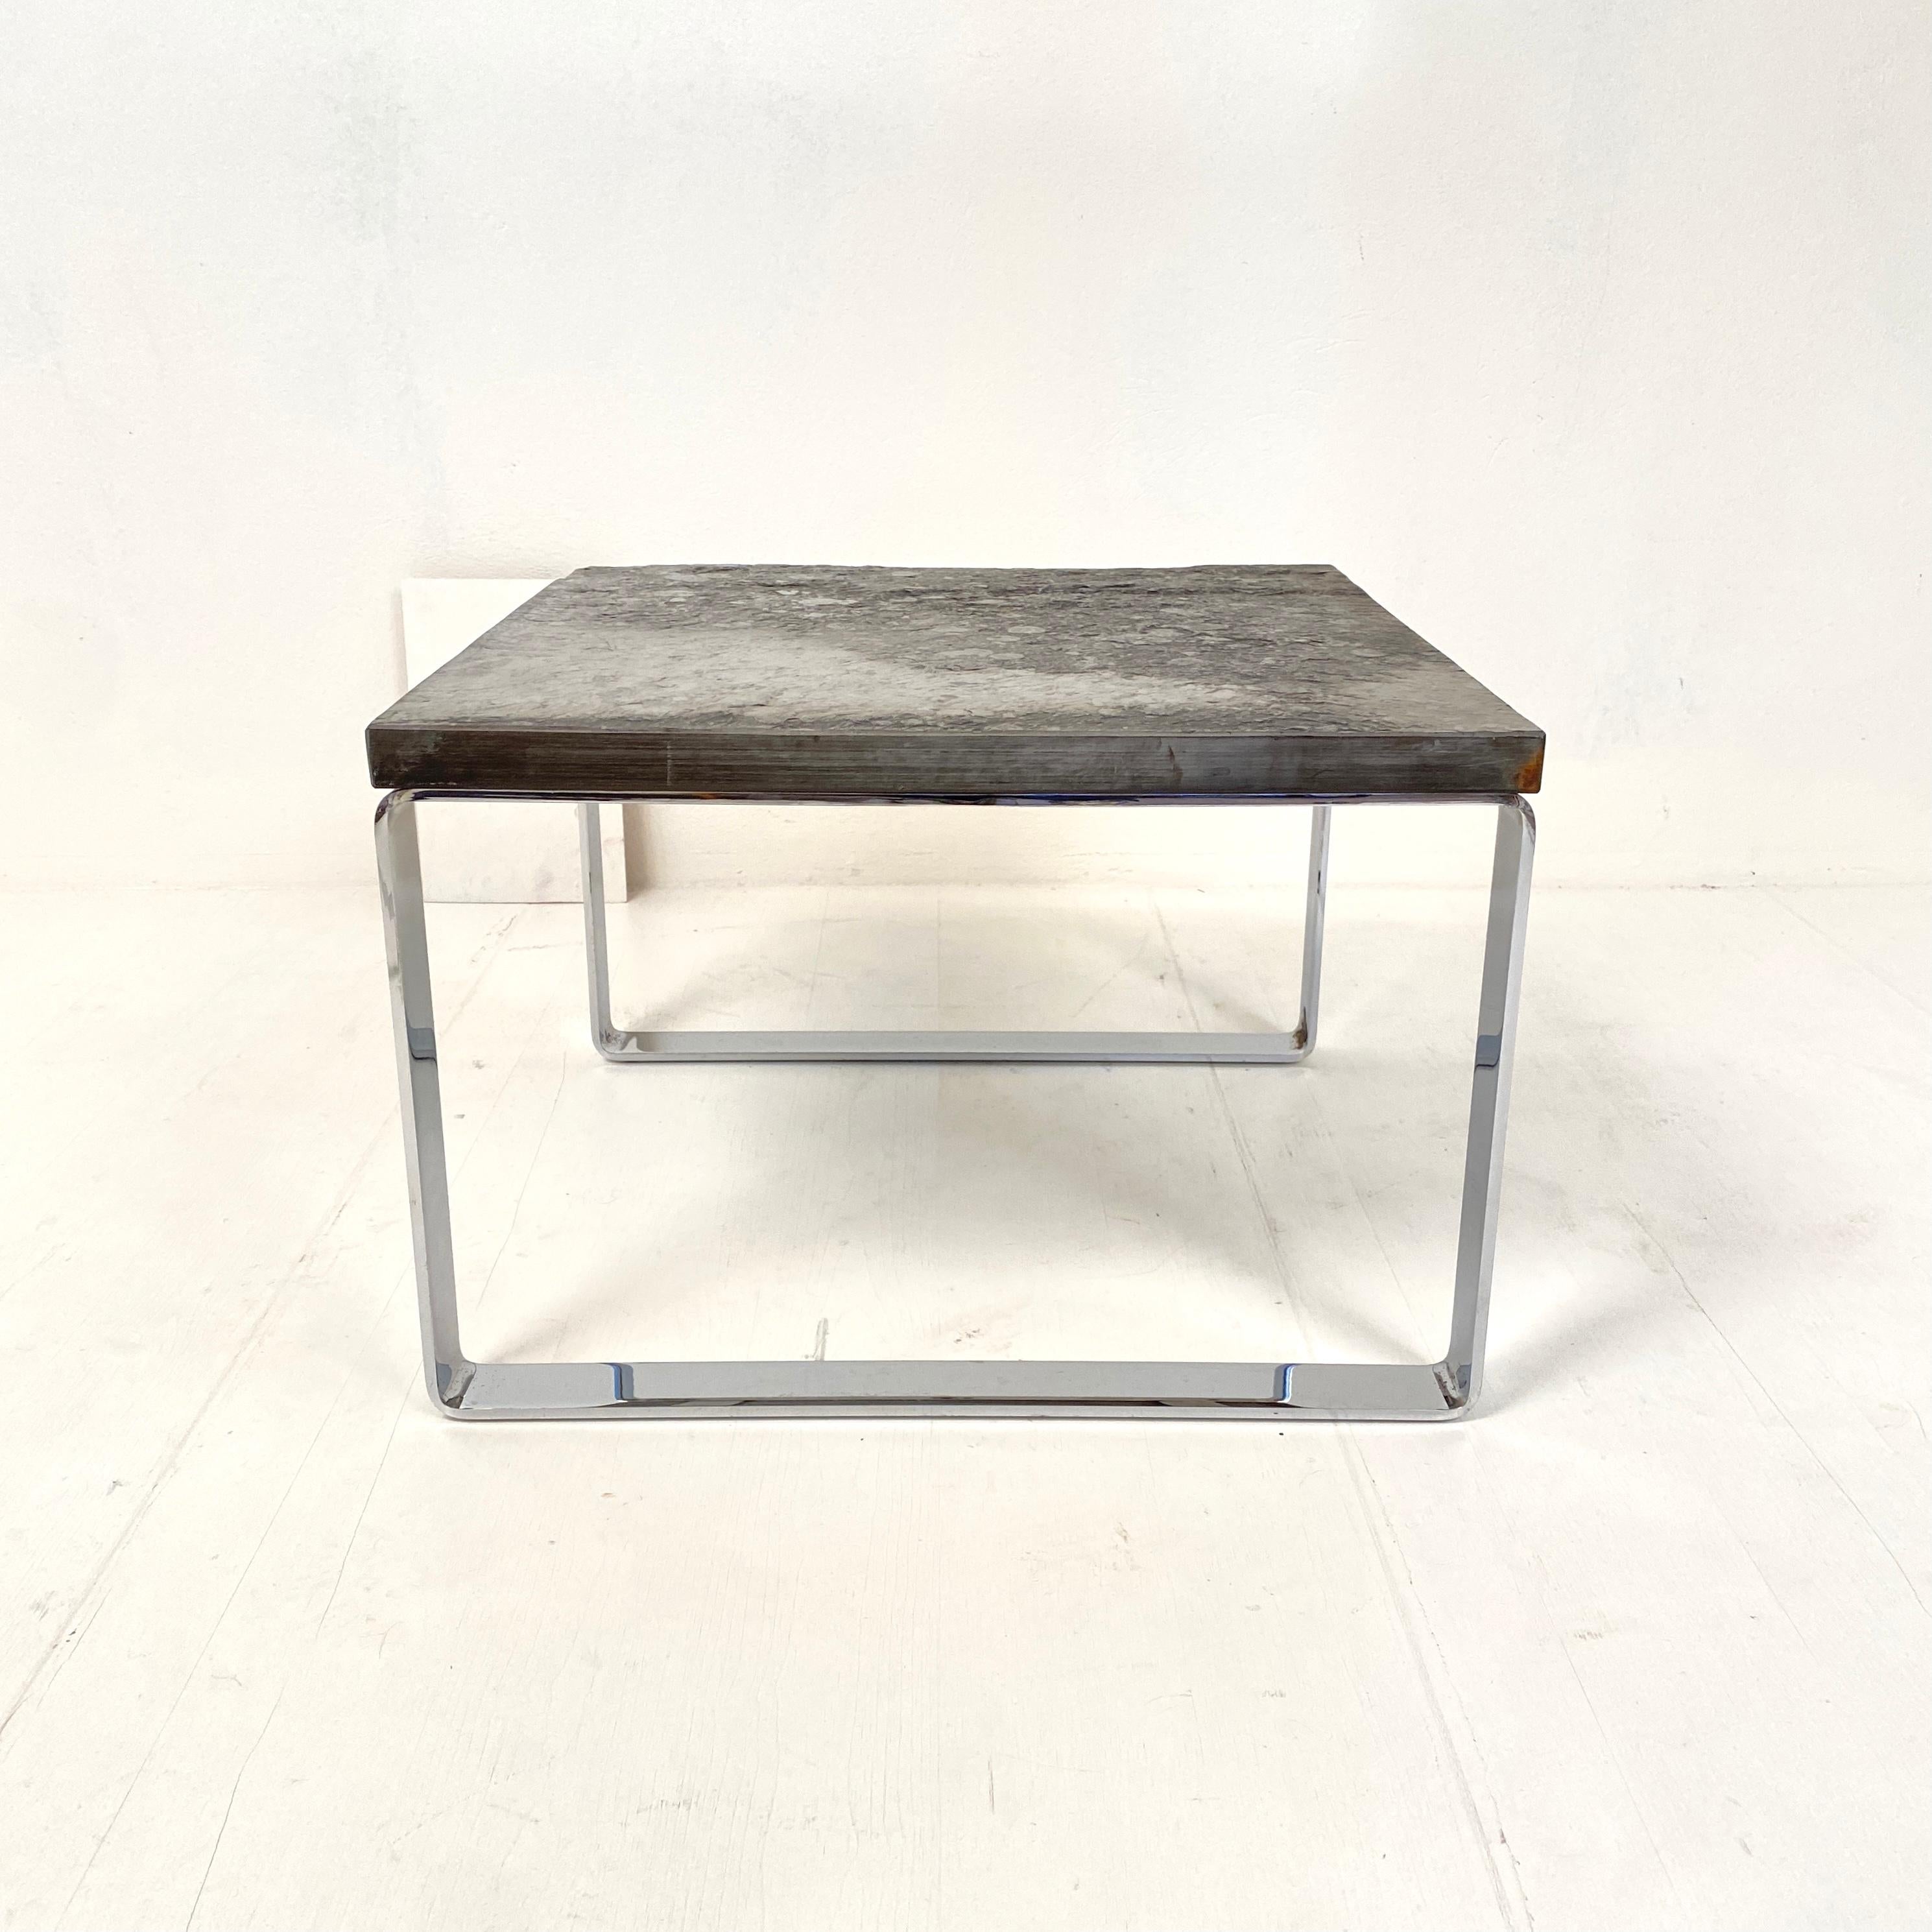 This mid century German coffee table model Primus 1062 by the company Draenert is made in chrome and slate and was produced around 1970.
The slate top is top, without chips, cracks or cracks. The chrome base is in a good vintage condition. There